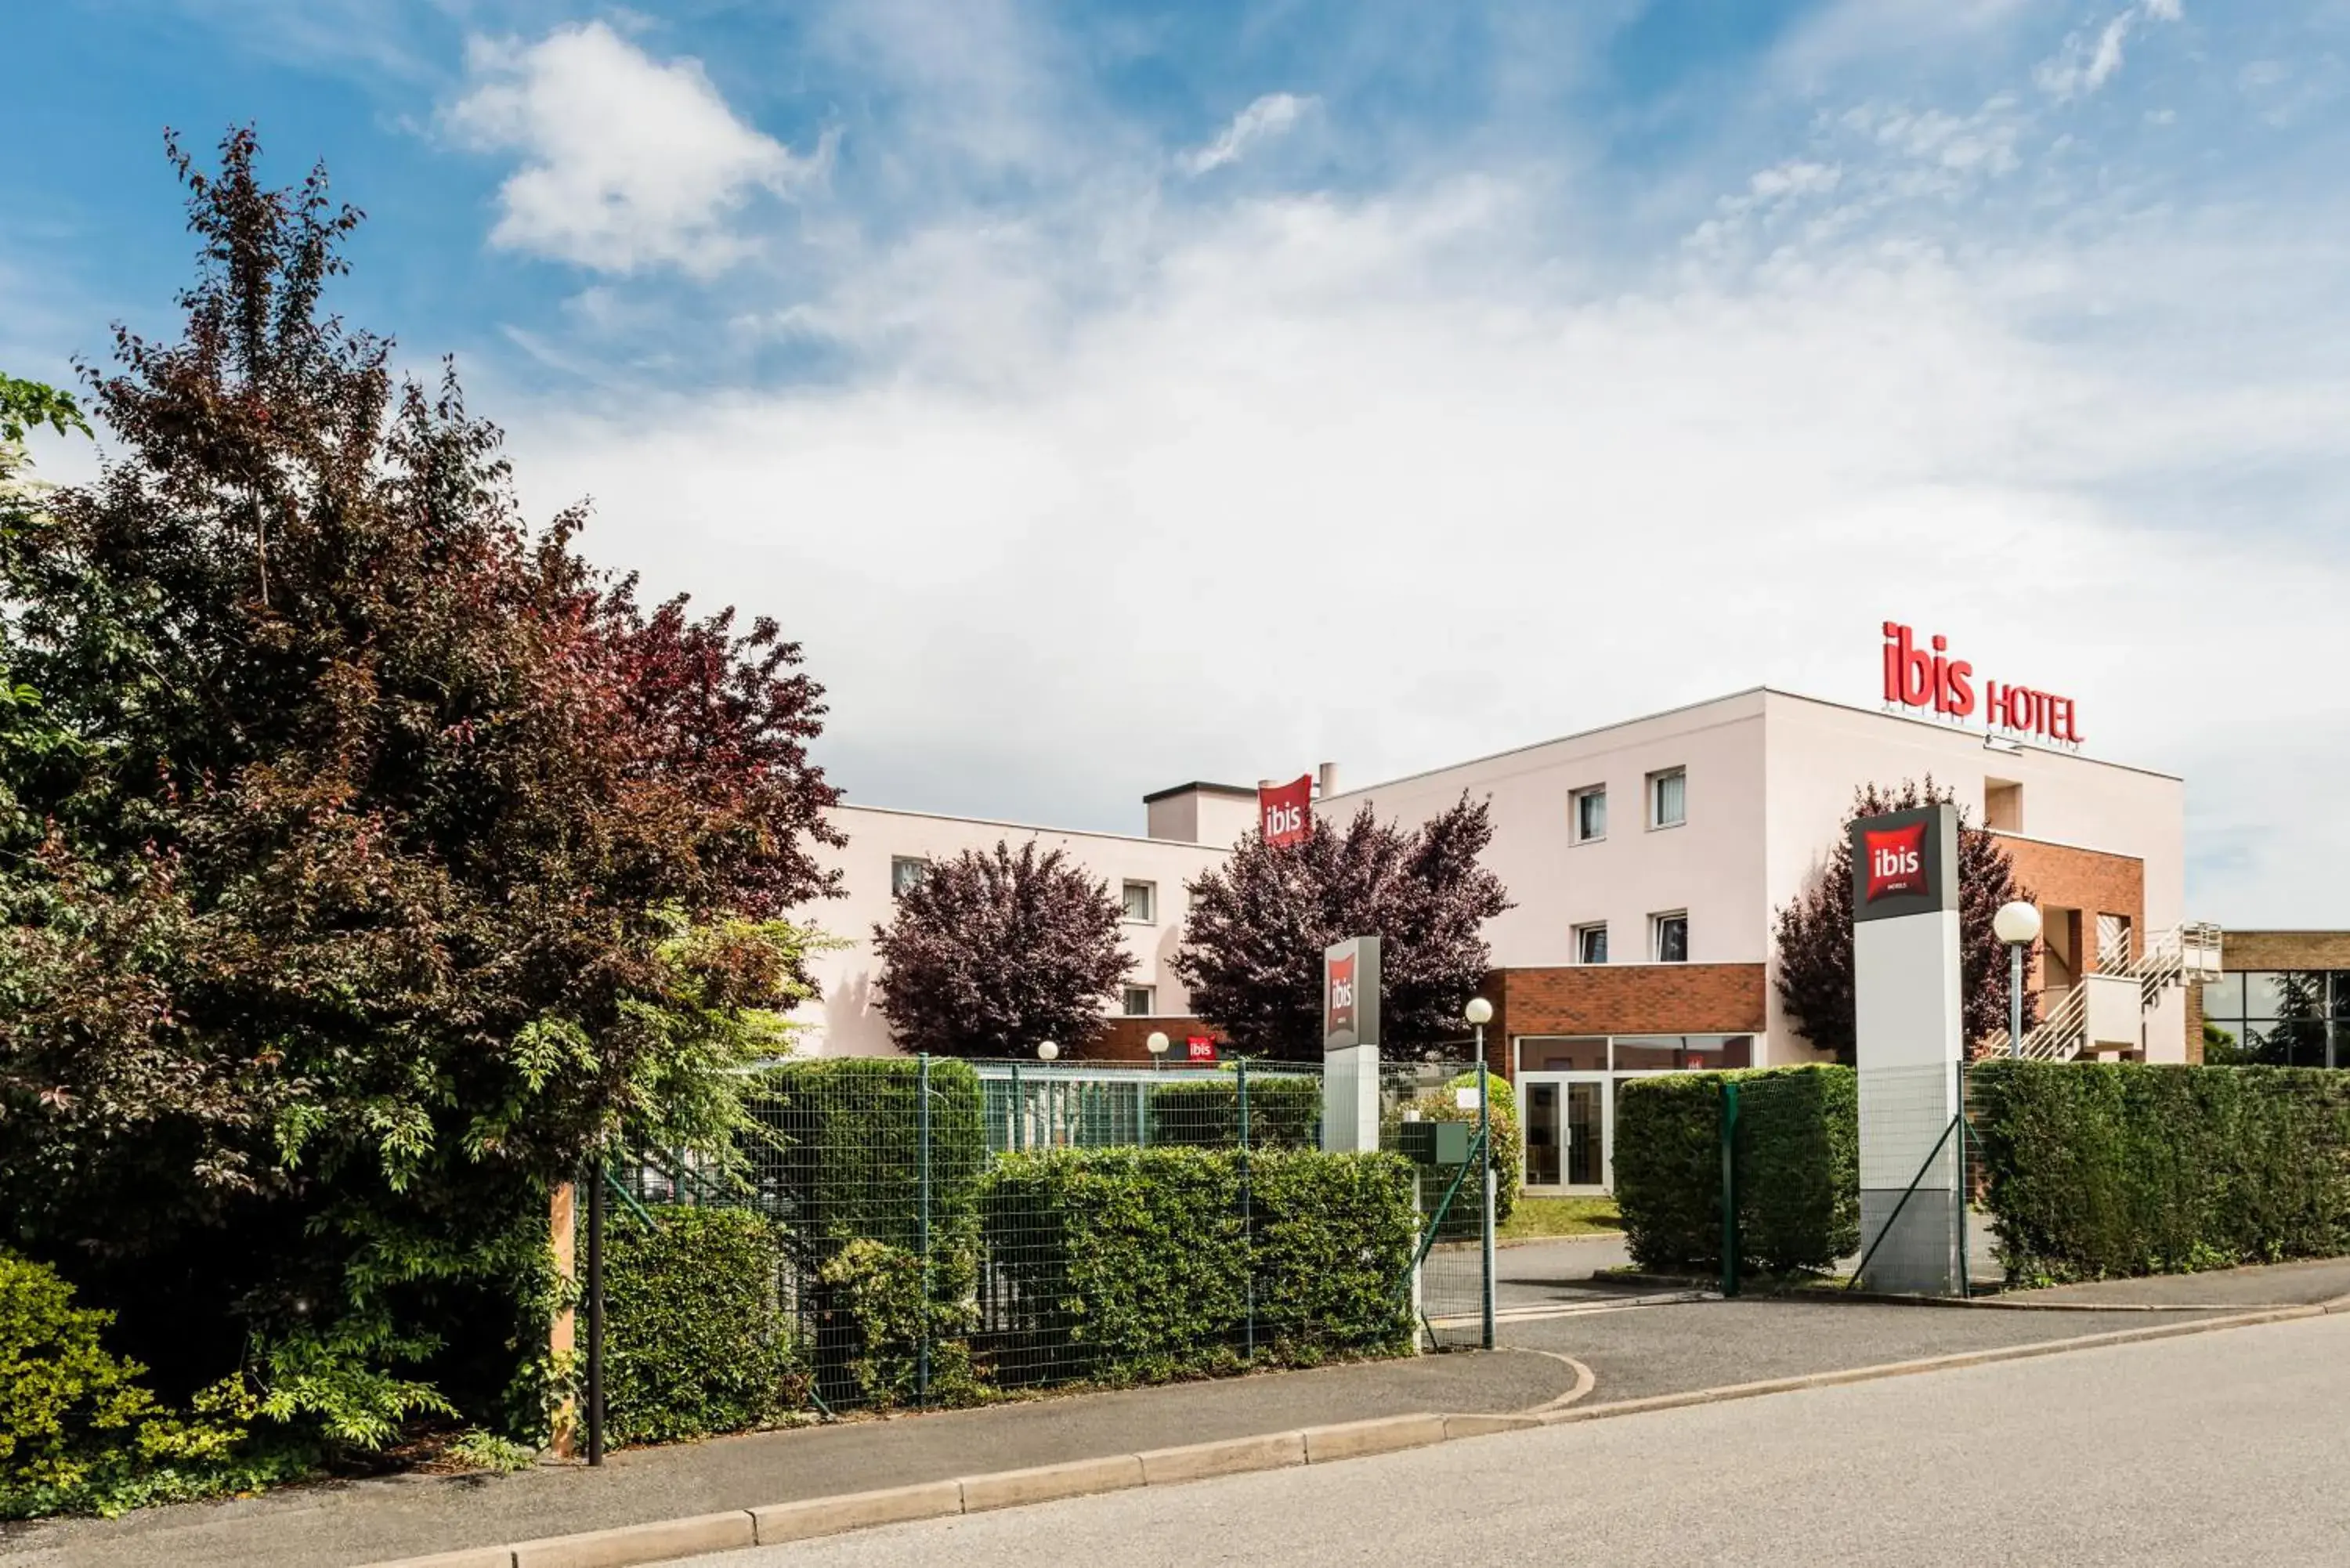 Property Building in ibis Massy